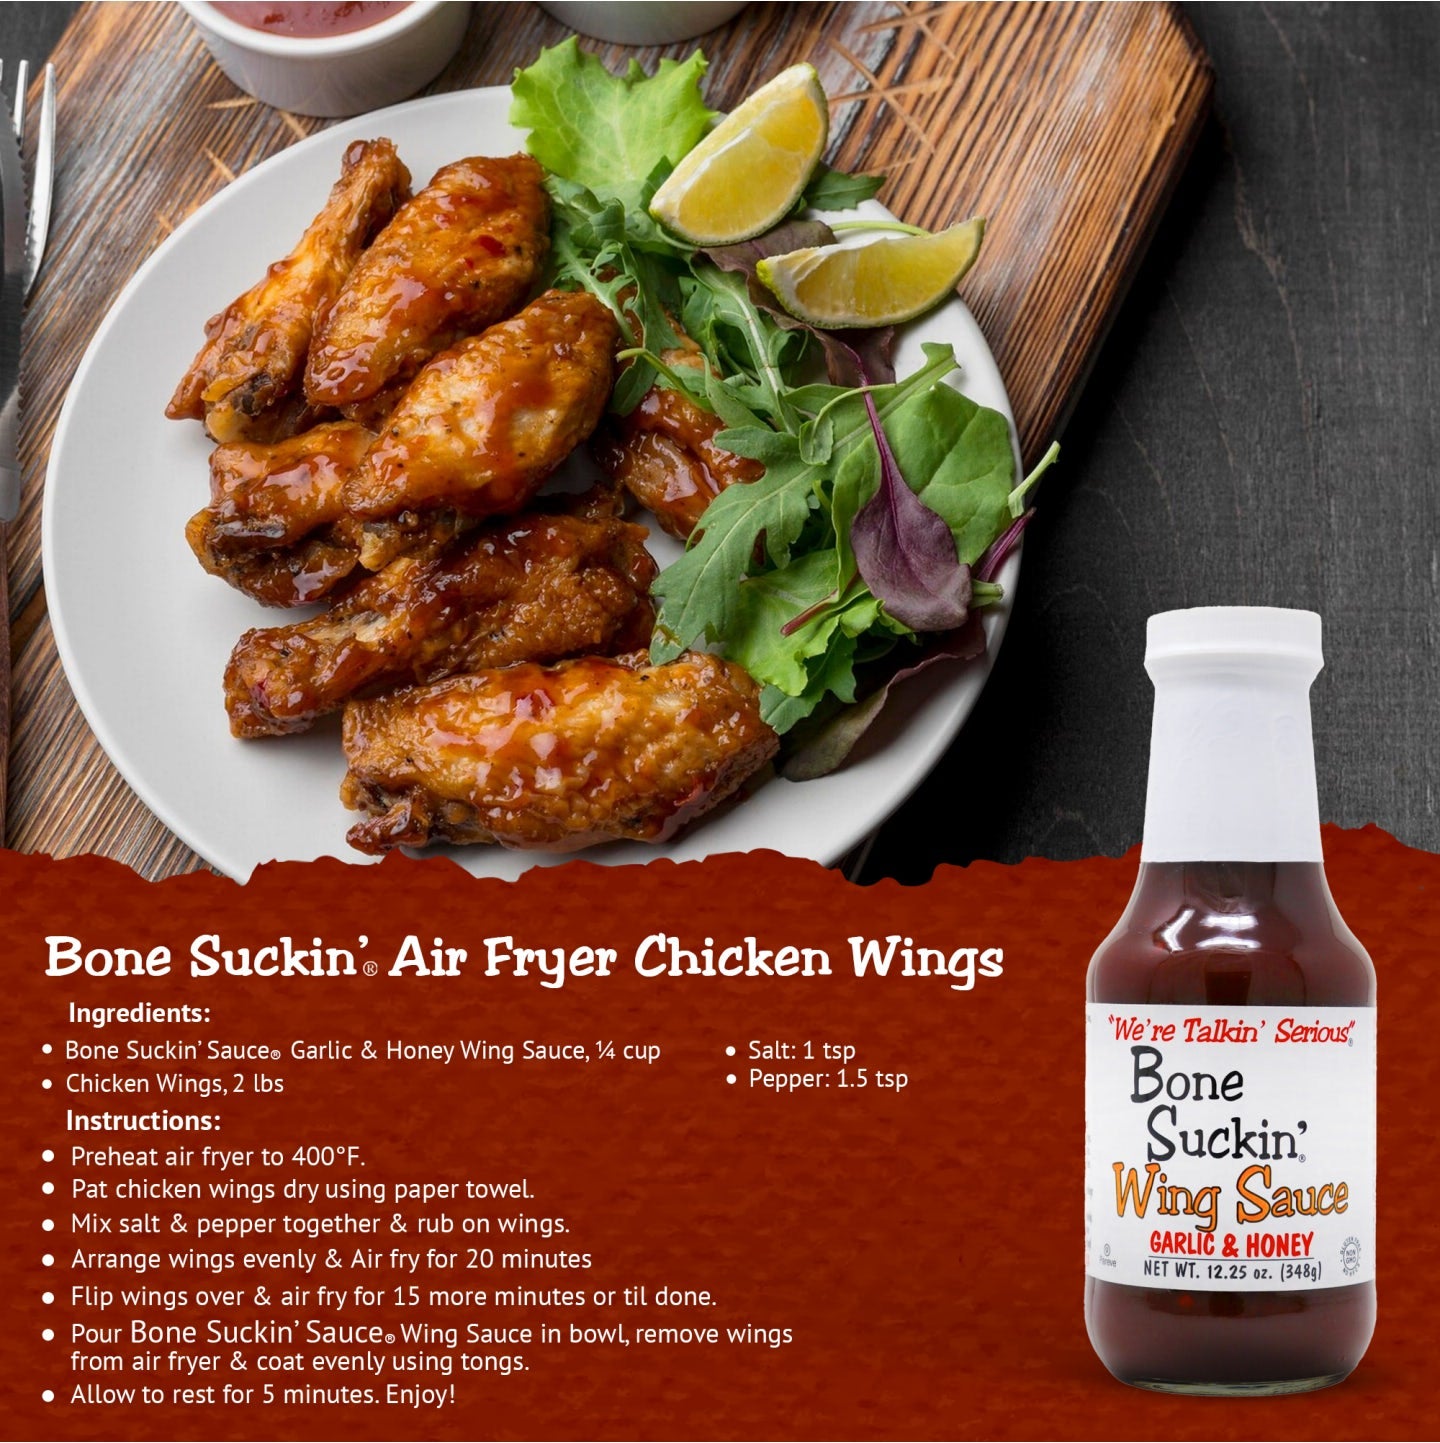 Bone Suckin Air Fryer Chicken Wings  Ingredients: Bone Suckin' Garlic & Honey Wing Sauce, 1/4 cup, Chicken Wings, 2 lbs, Salt, 1 tsp, Pepper, 1.5 tsp.  Instructions: Preheat air fryer to 400°F. Pat chicken wings dry using paper towel. Mix salt & pepper together & rub on wings. Arrange wings evenly & air fry for 20 minutes. Flip wings over & air fry for 15 more minutes or til done. Pour Bone Suckin' Sauce in a bowl, remove wings from air rfyer & coat evenly using tongs. Allow to rest for 5 minutes. Enjoy!